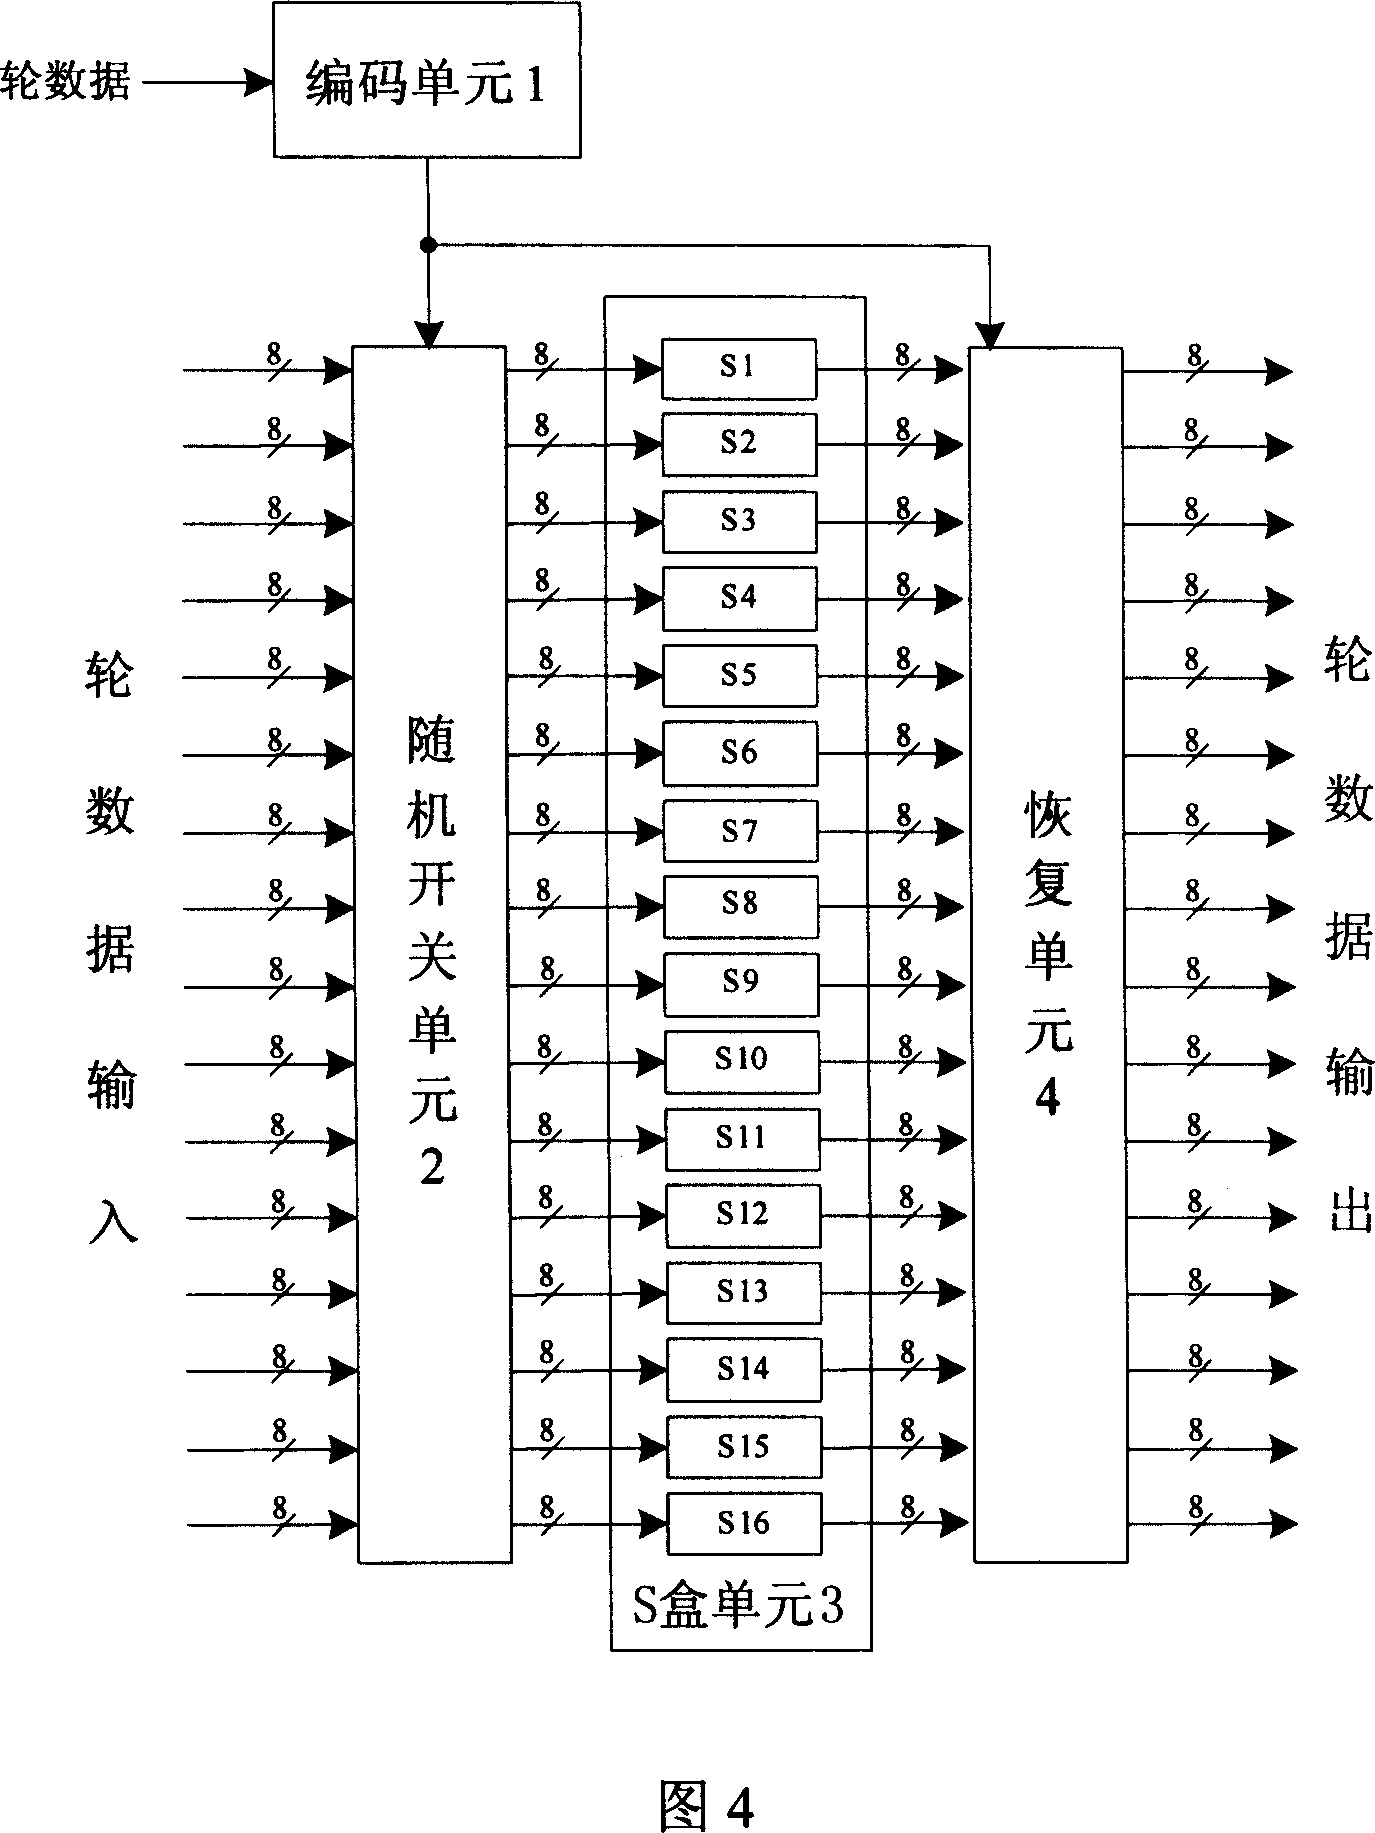 A byte replacement circuit for power consumption attack prevention